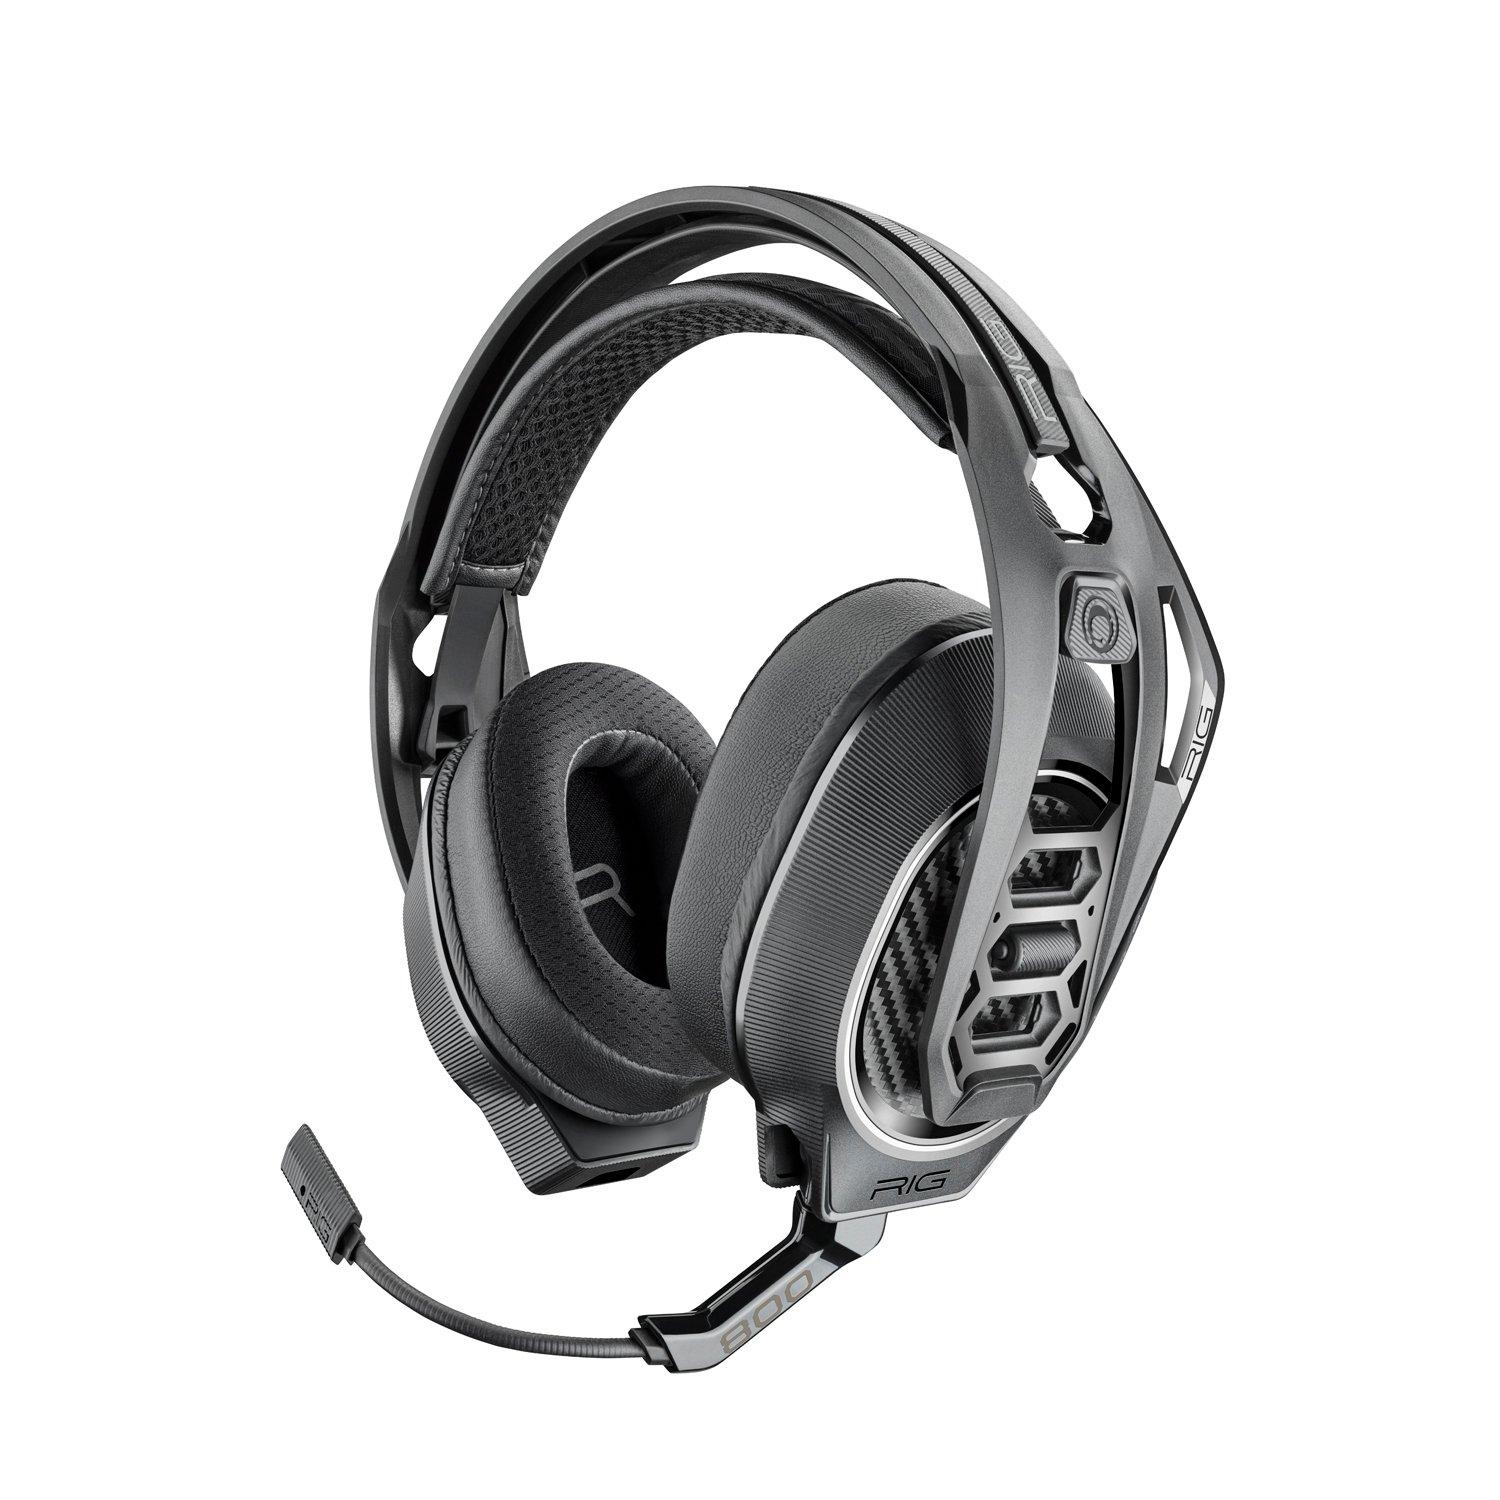 list item 4 of 7 RIG 800 PRO HX Wireless Headset for Xbox and Windows 10 with Charging Base